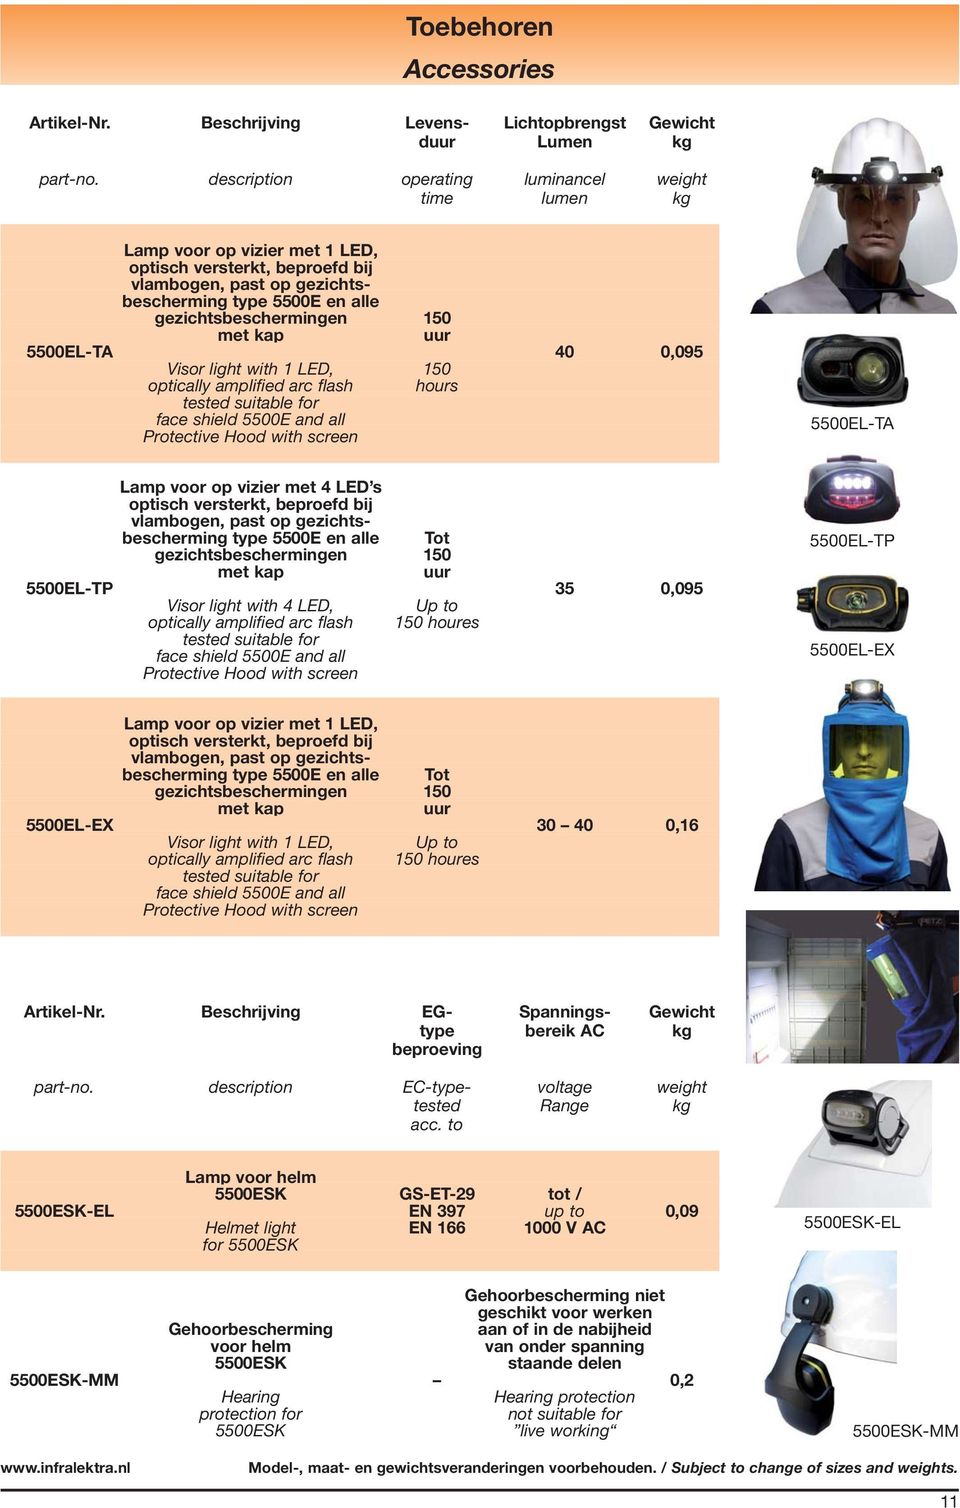 150 met kap uur 5500EL-TA 40 0,095 Visor light with 1 LED, 150 optically amplified arc flash hours tested suitable for face shield 5500E and all Protective Hood with screen 5500EL-TA Lamp voor op